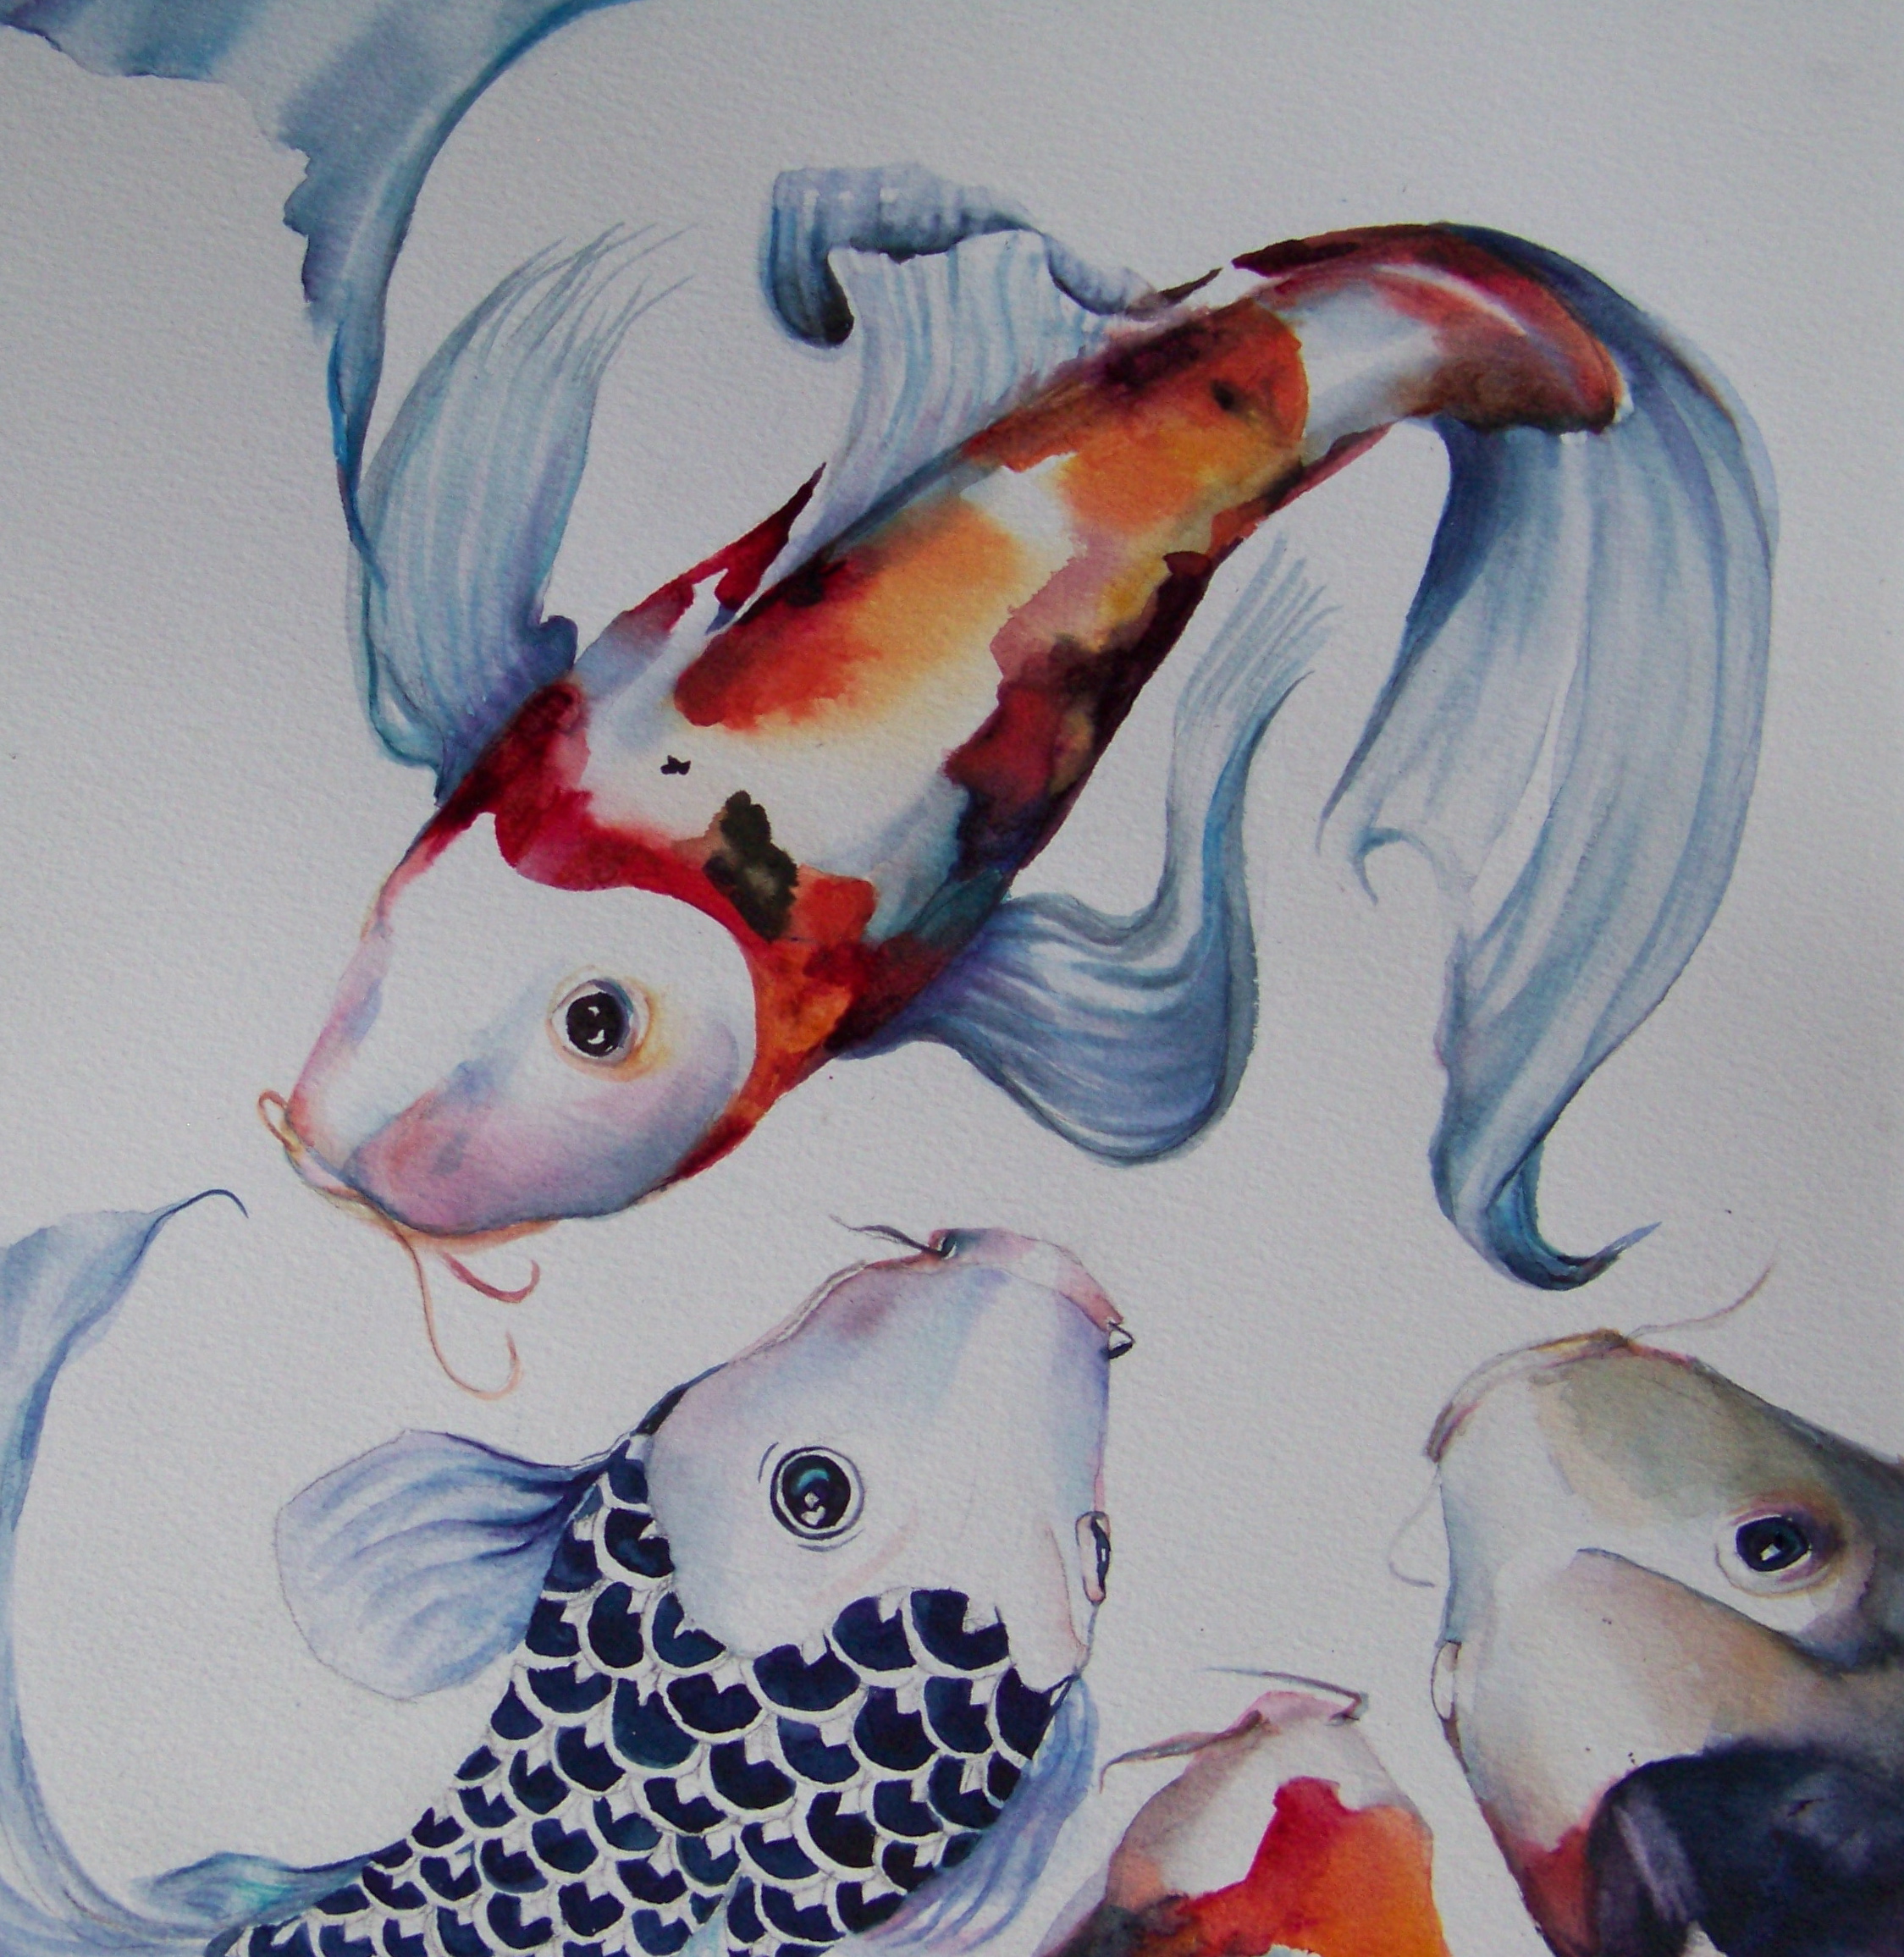 I love the pattern on the Koi